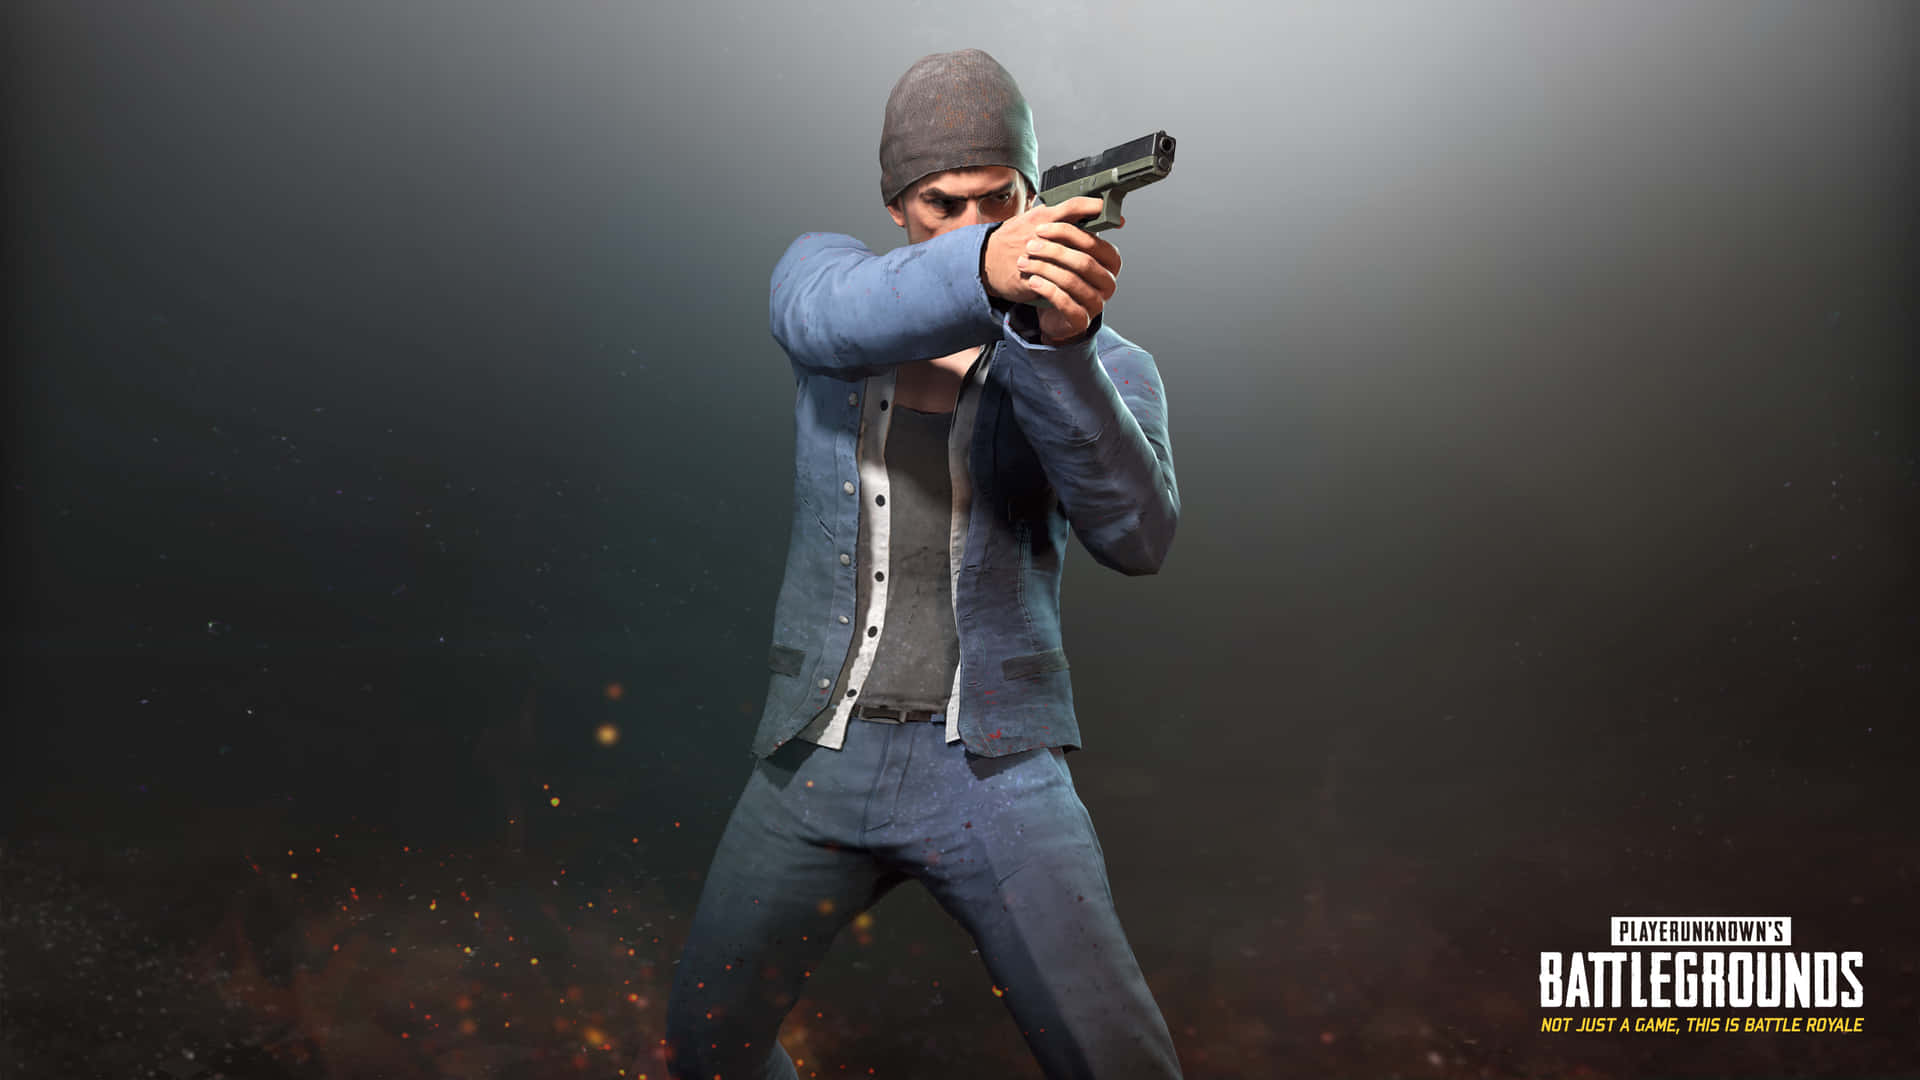 A Man Holding A Gun In Front Of A Dark Background